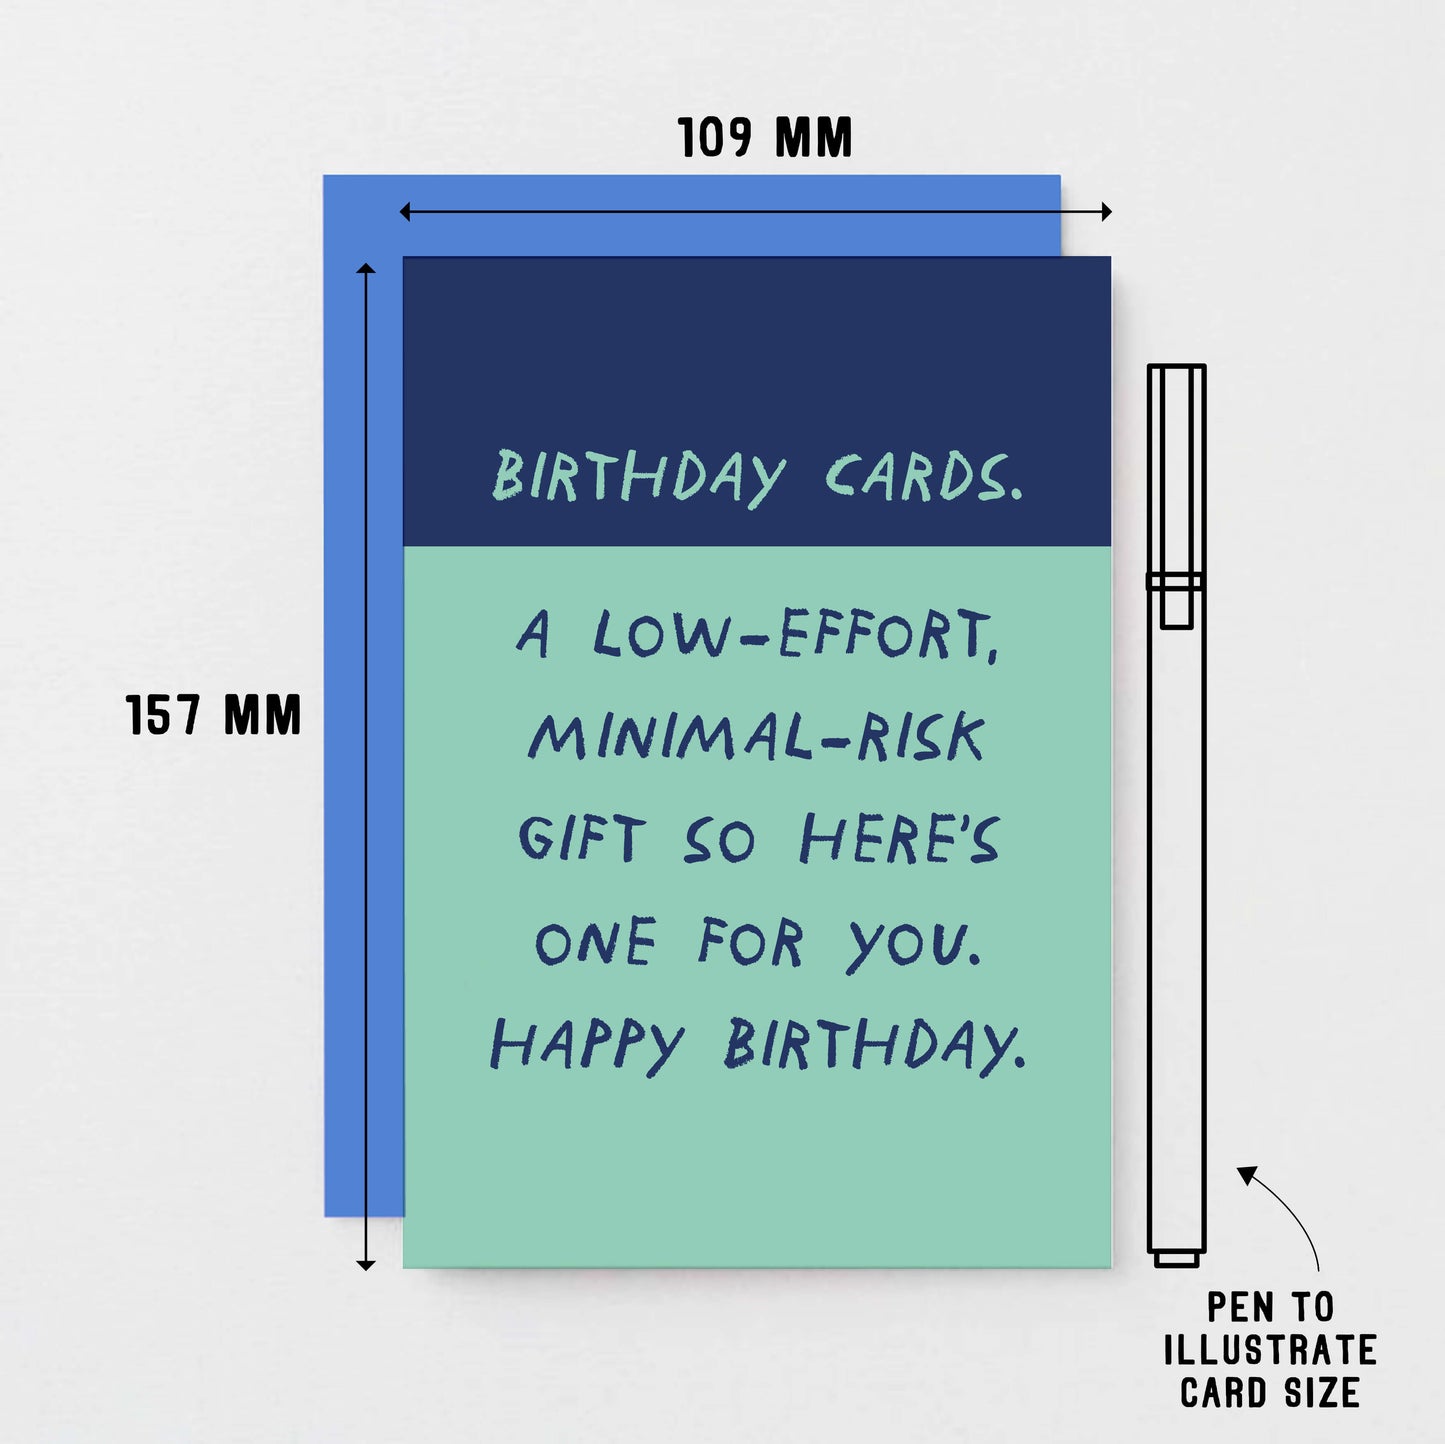 Birthday Card by SixElevenCreations. Reads Birthday Cards. A low-effort, minimal risk gift so here's one for you. Happy Birthday. Product Code SE2101A6